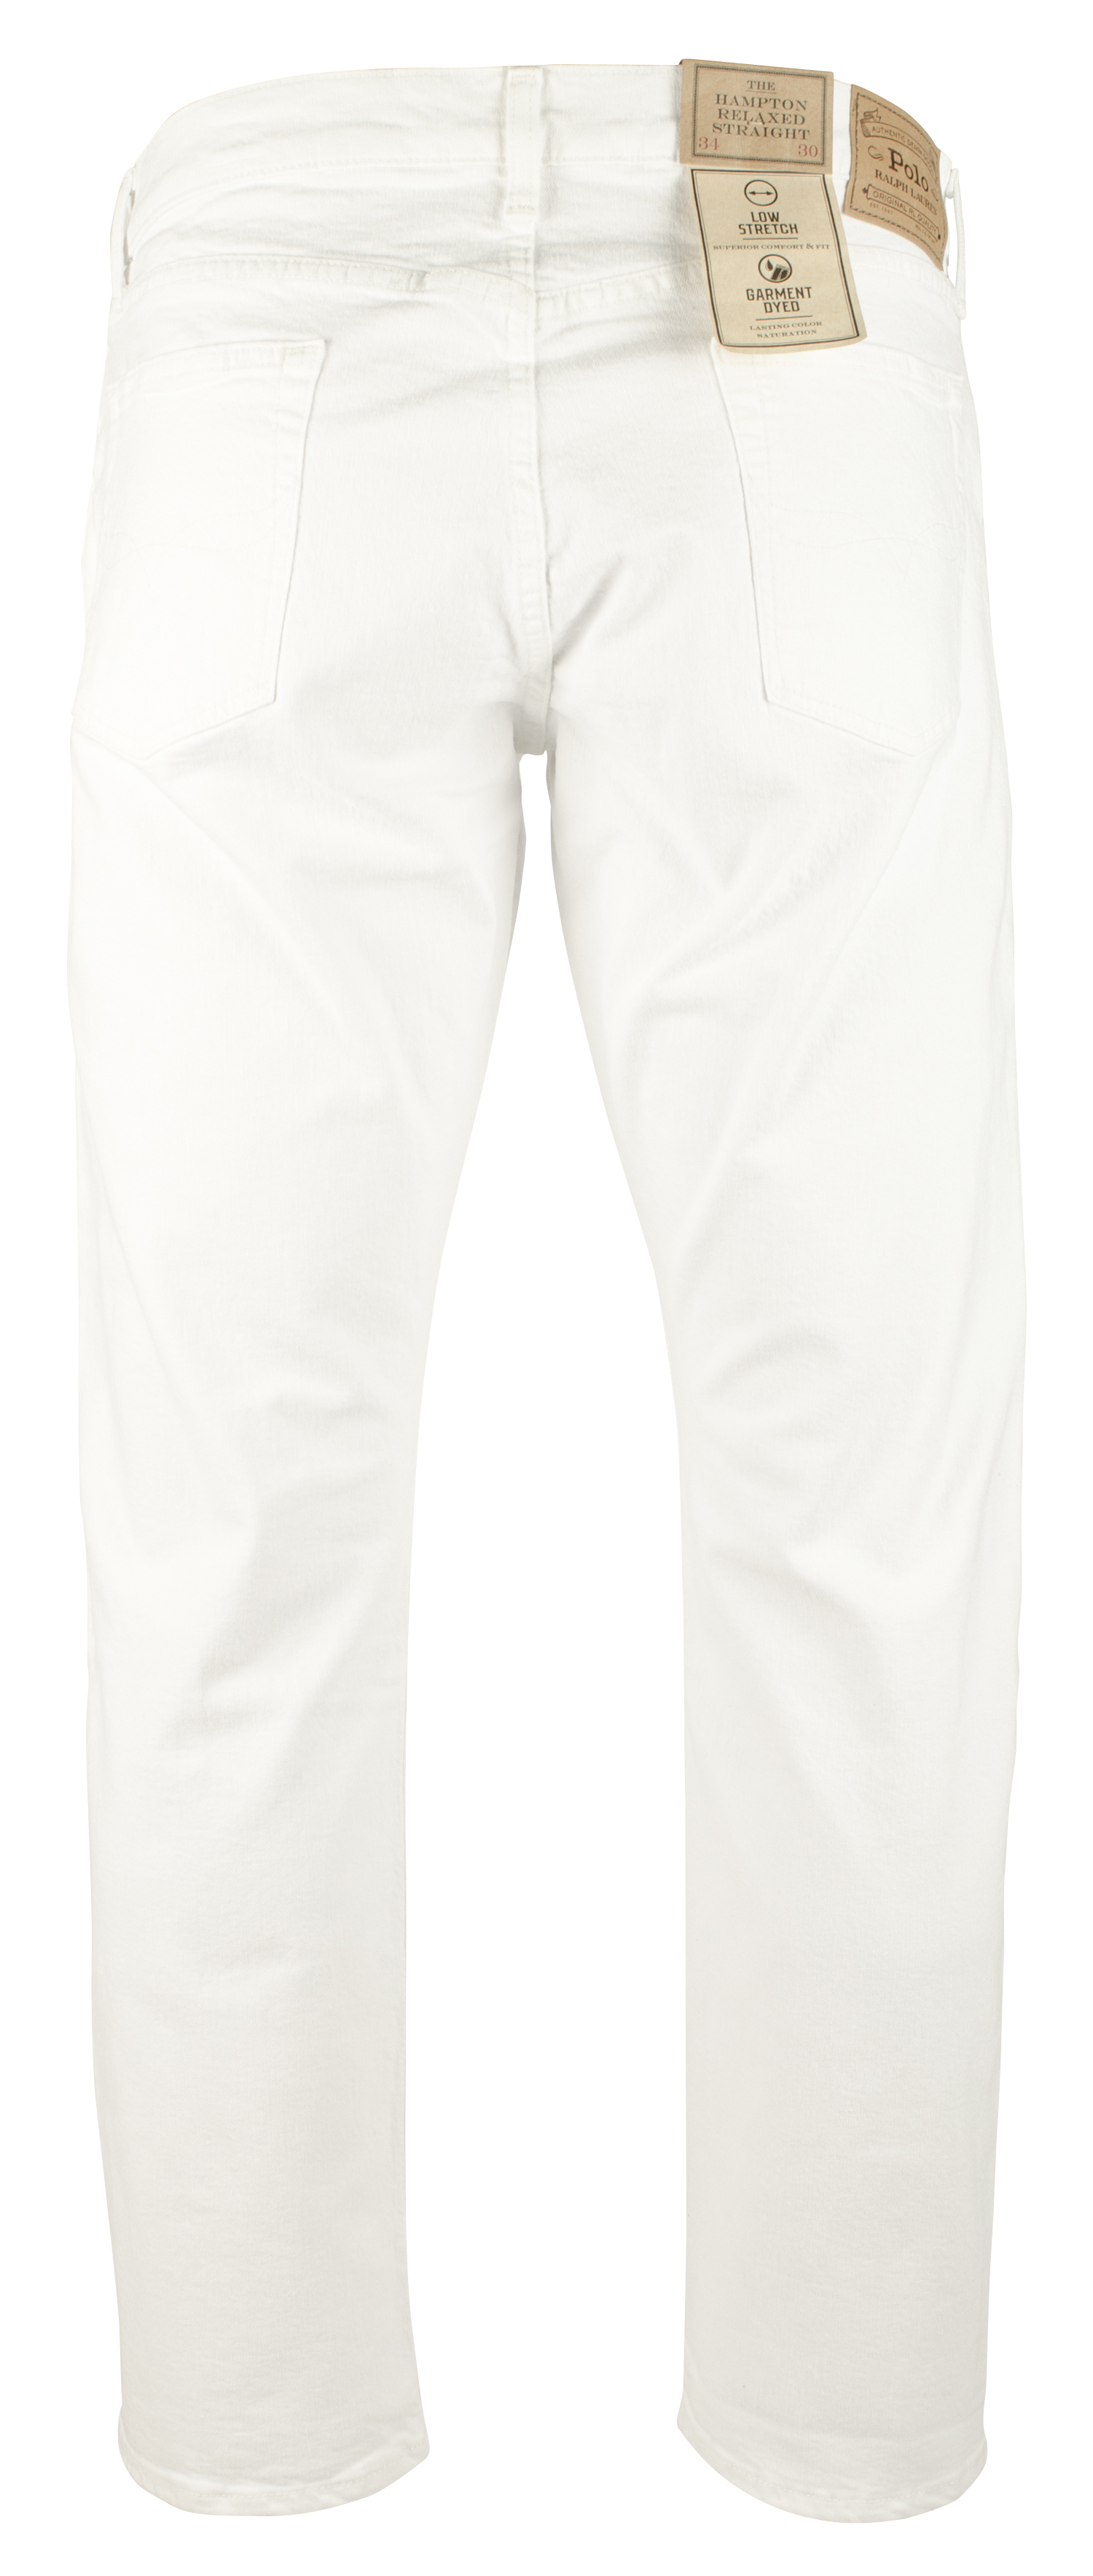 Men's Hampton Relaxed Straight Jeans-HW-32WX32L - image 2 of 3